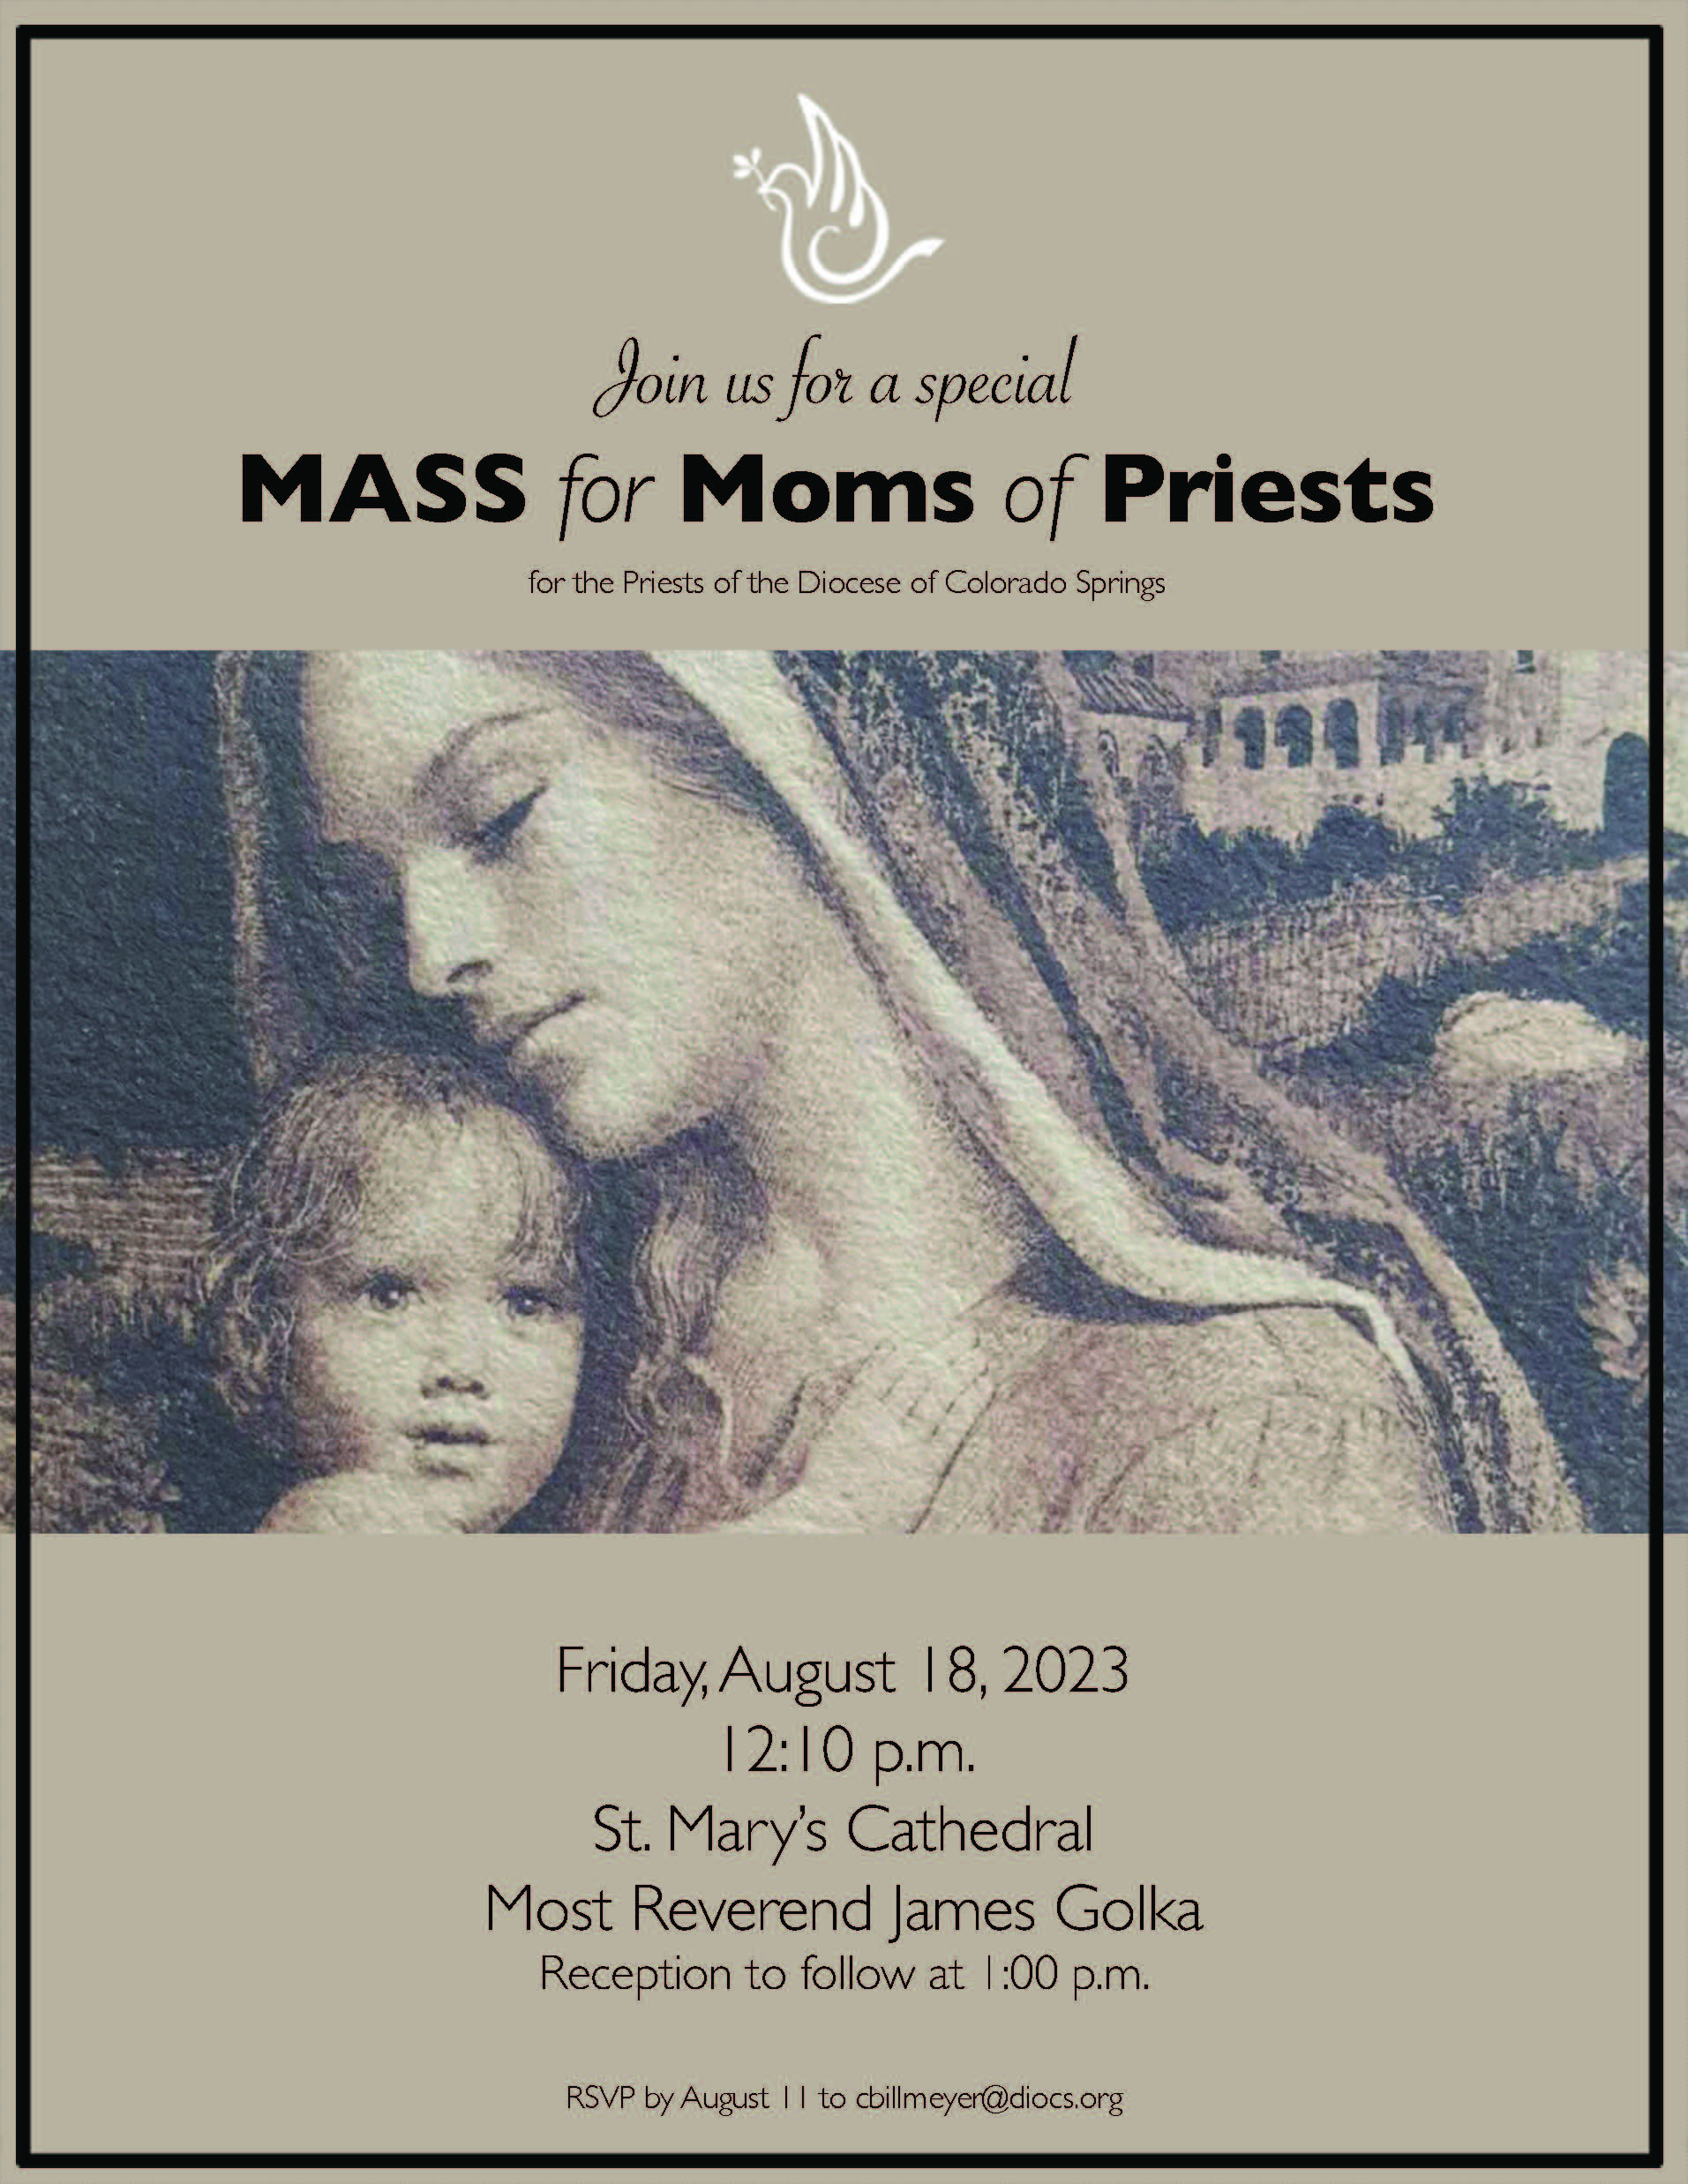 Mass for Moms of Priests